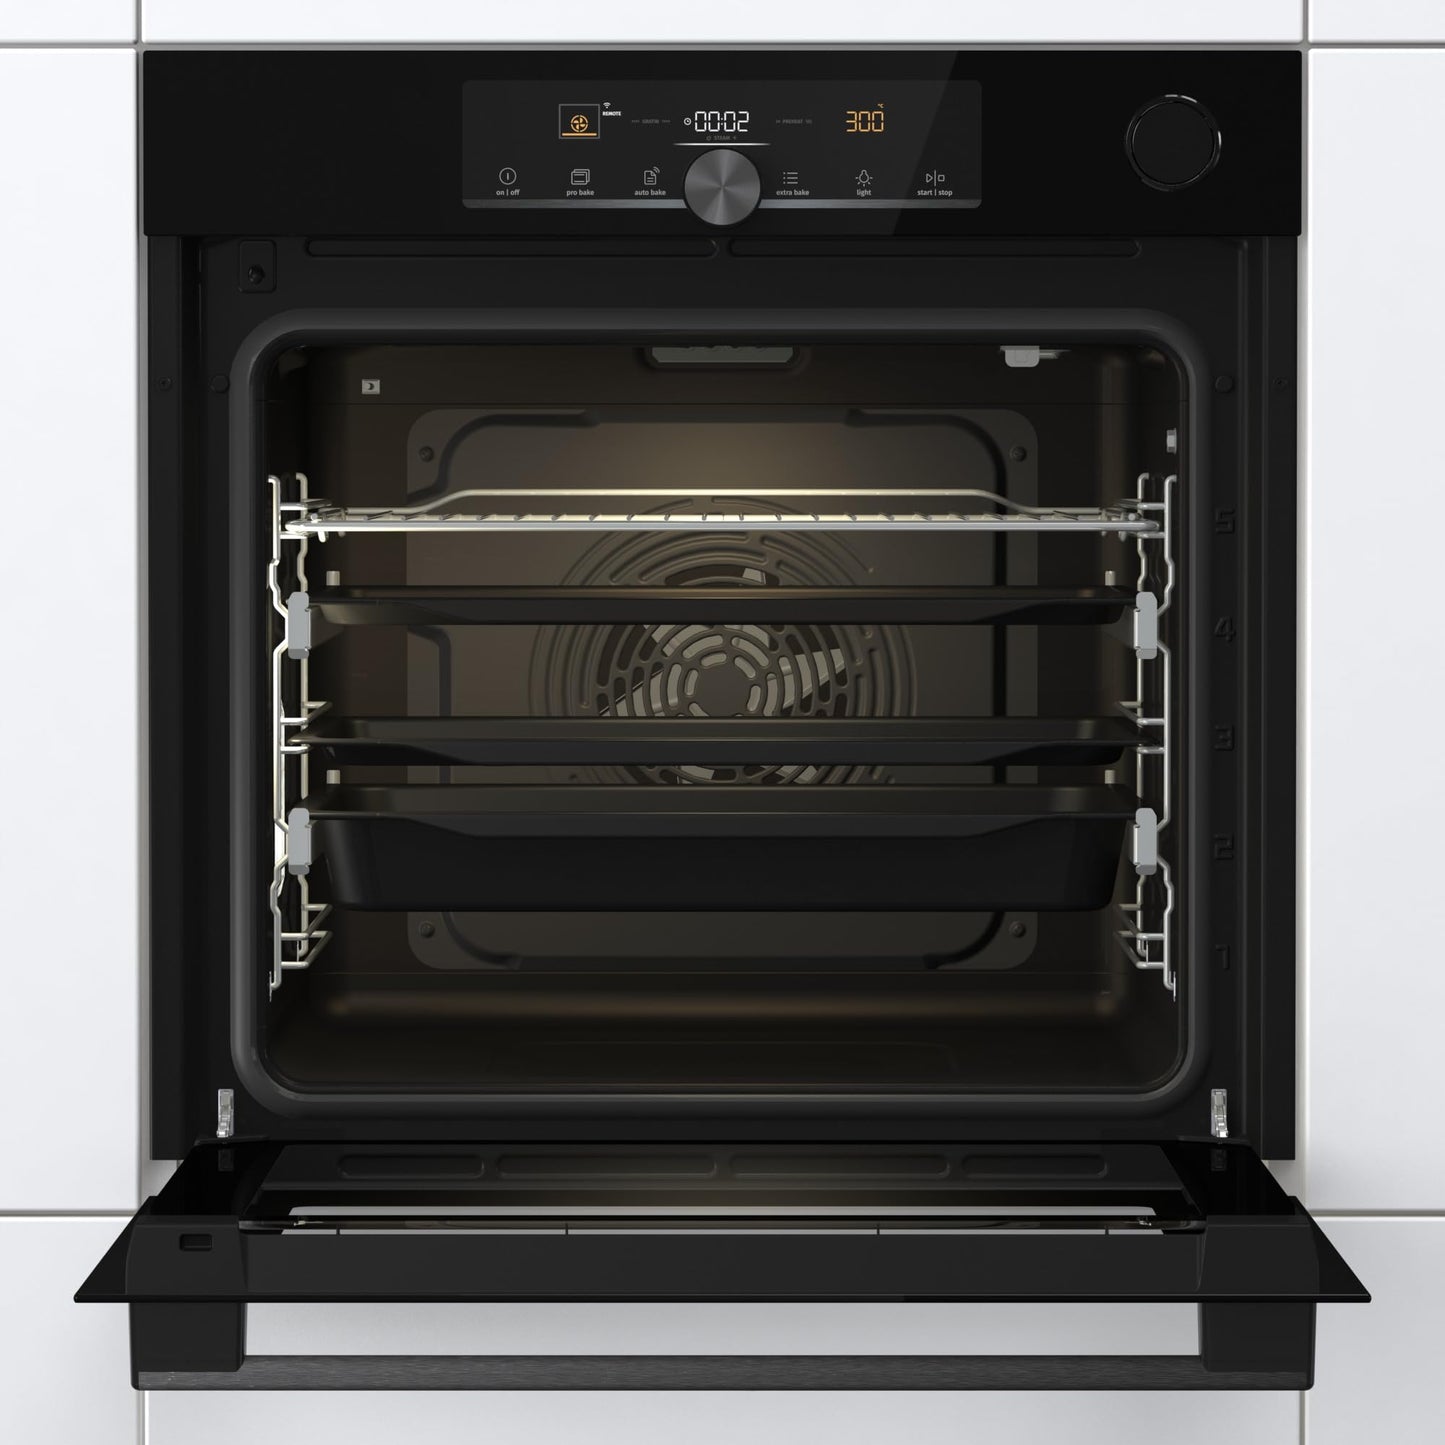 Gorenje BSA6747A04BGWI, 60 cm Built in Electric Oven with Fan, Integrated WiFi Operation, 77 Liters Capacity, Made in Slovenia, Black,1 Year Warranty